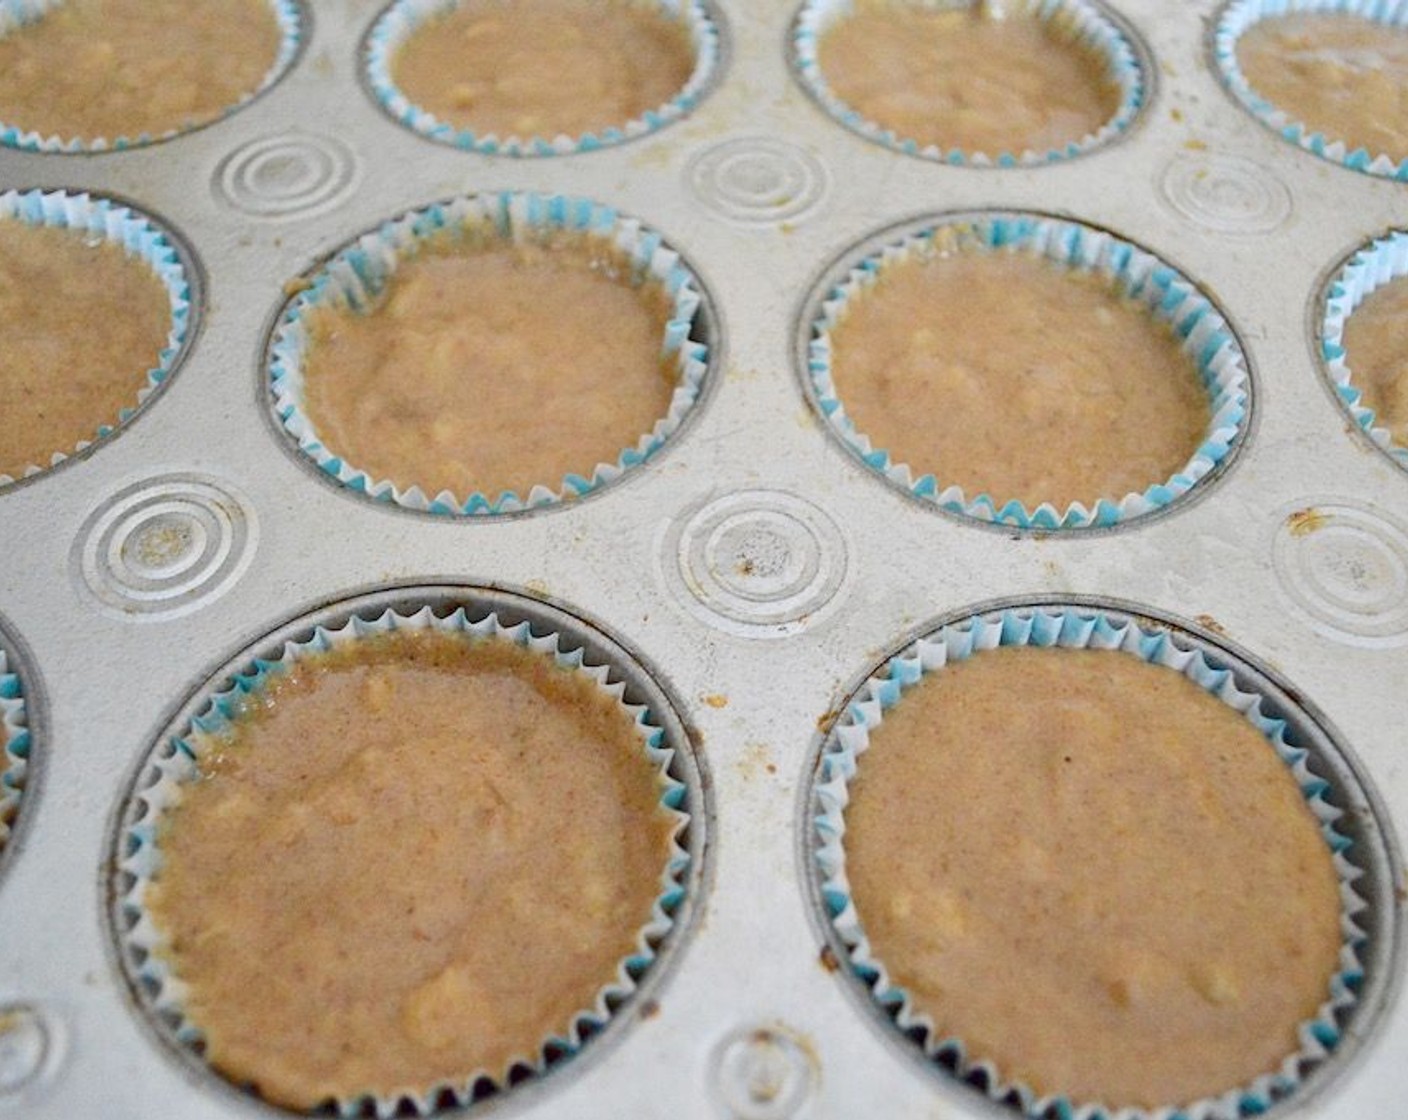 step 5 Evenly divide the batter among the prepared muffin pan, filling each one almost to the top.